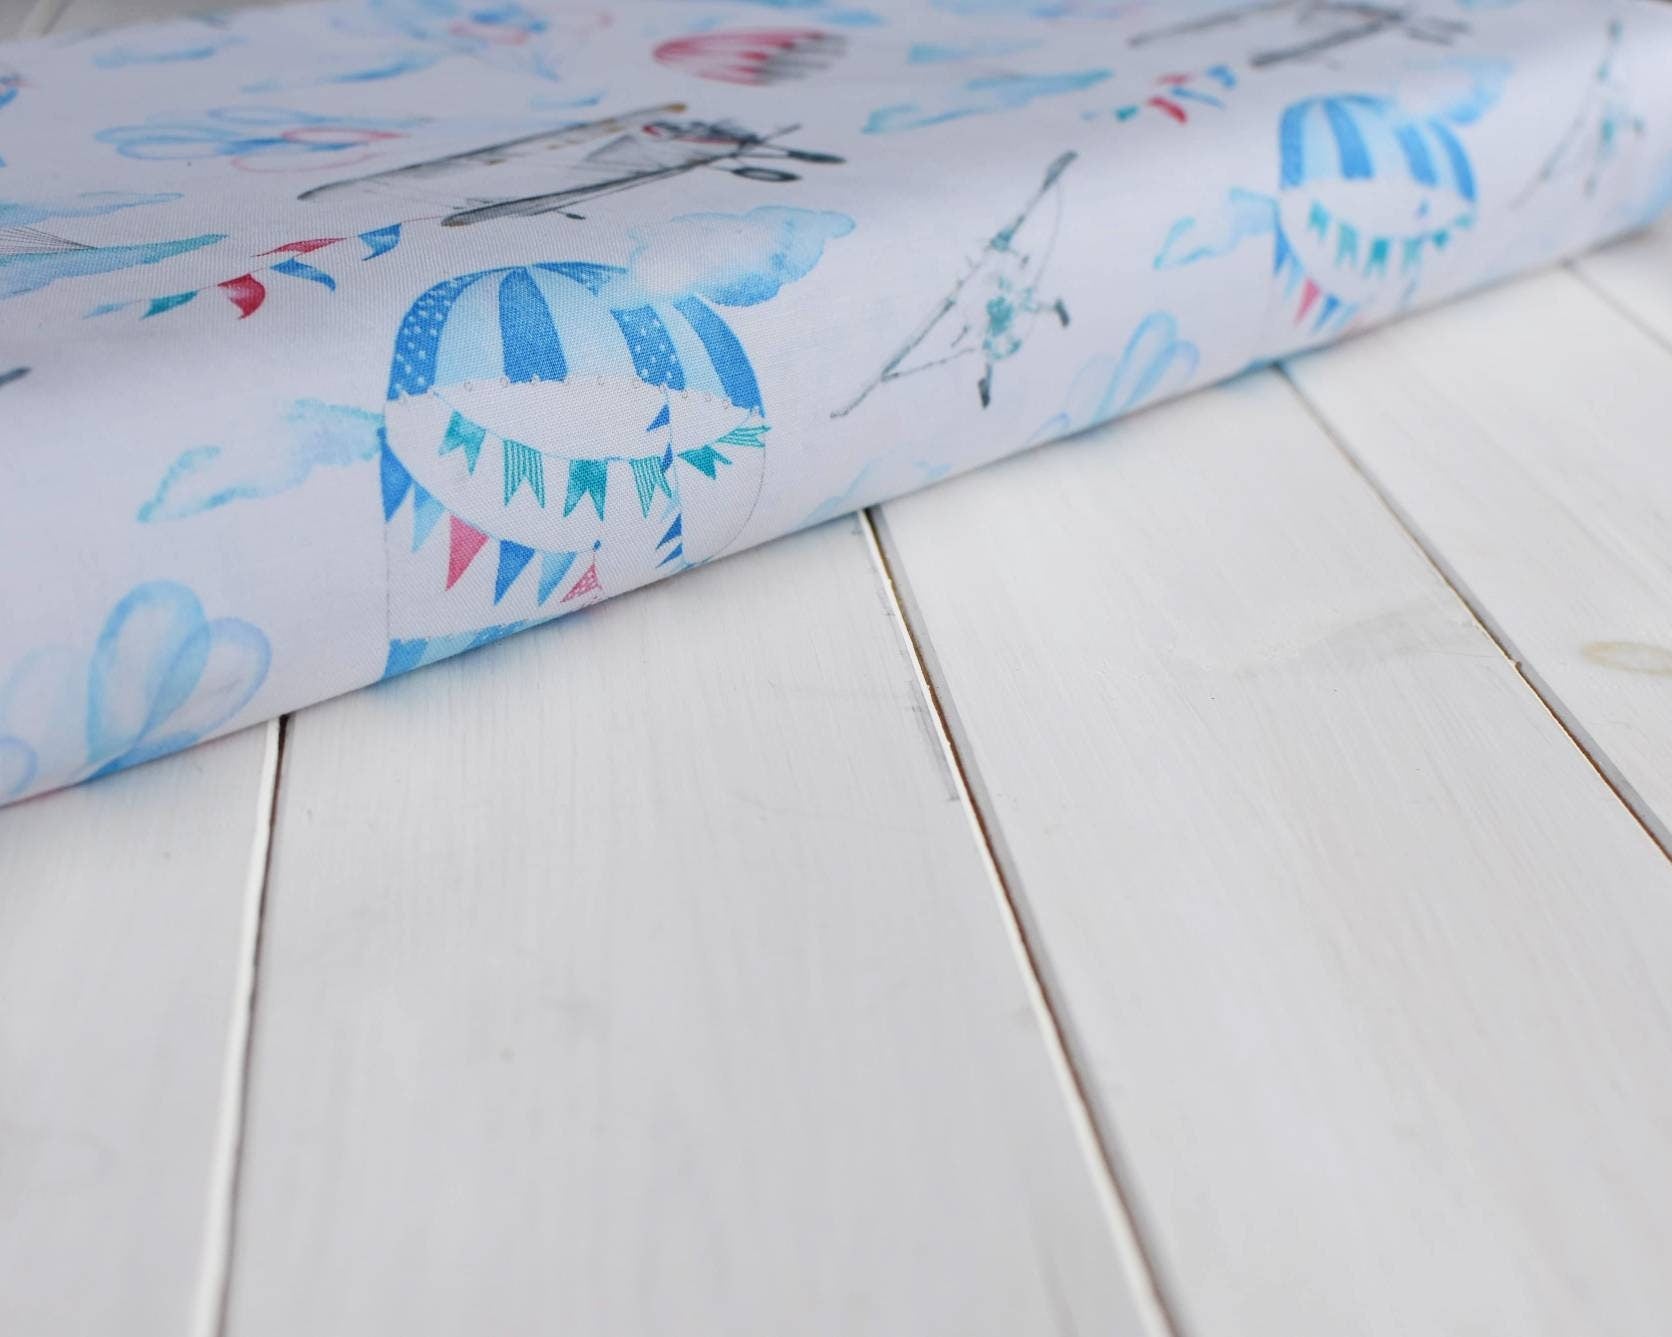 Air balloon and plane on white cotton fabric